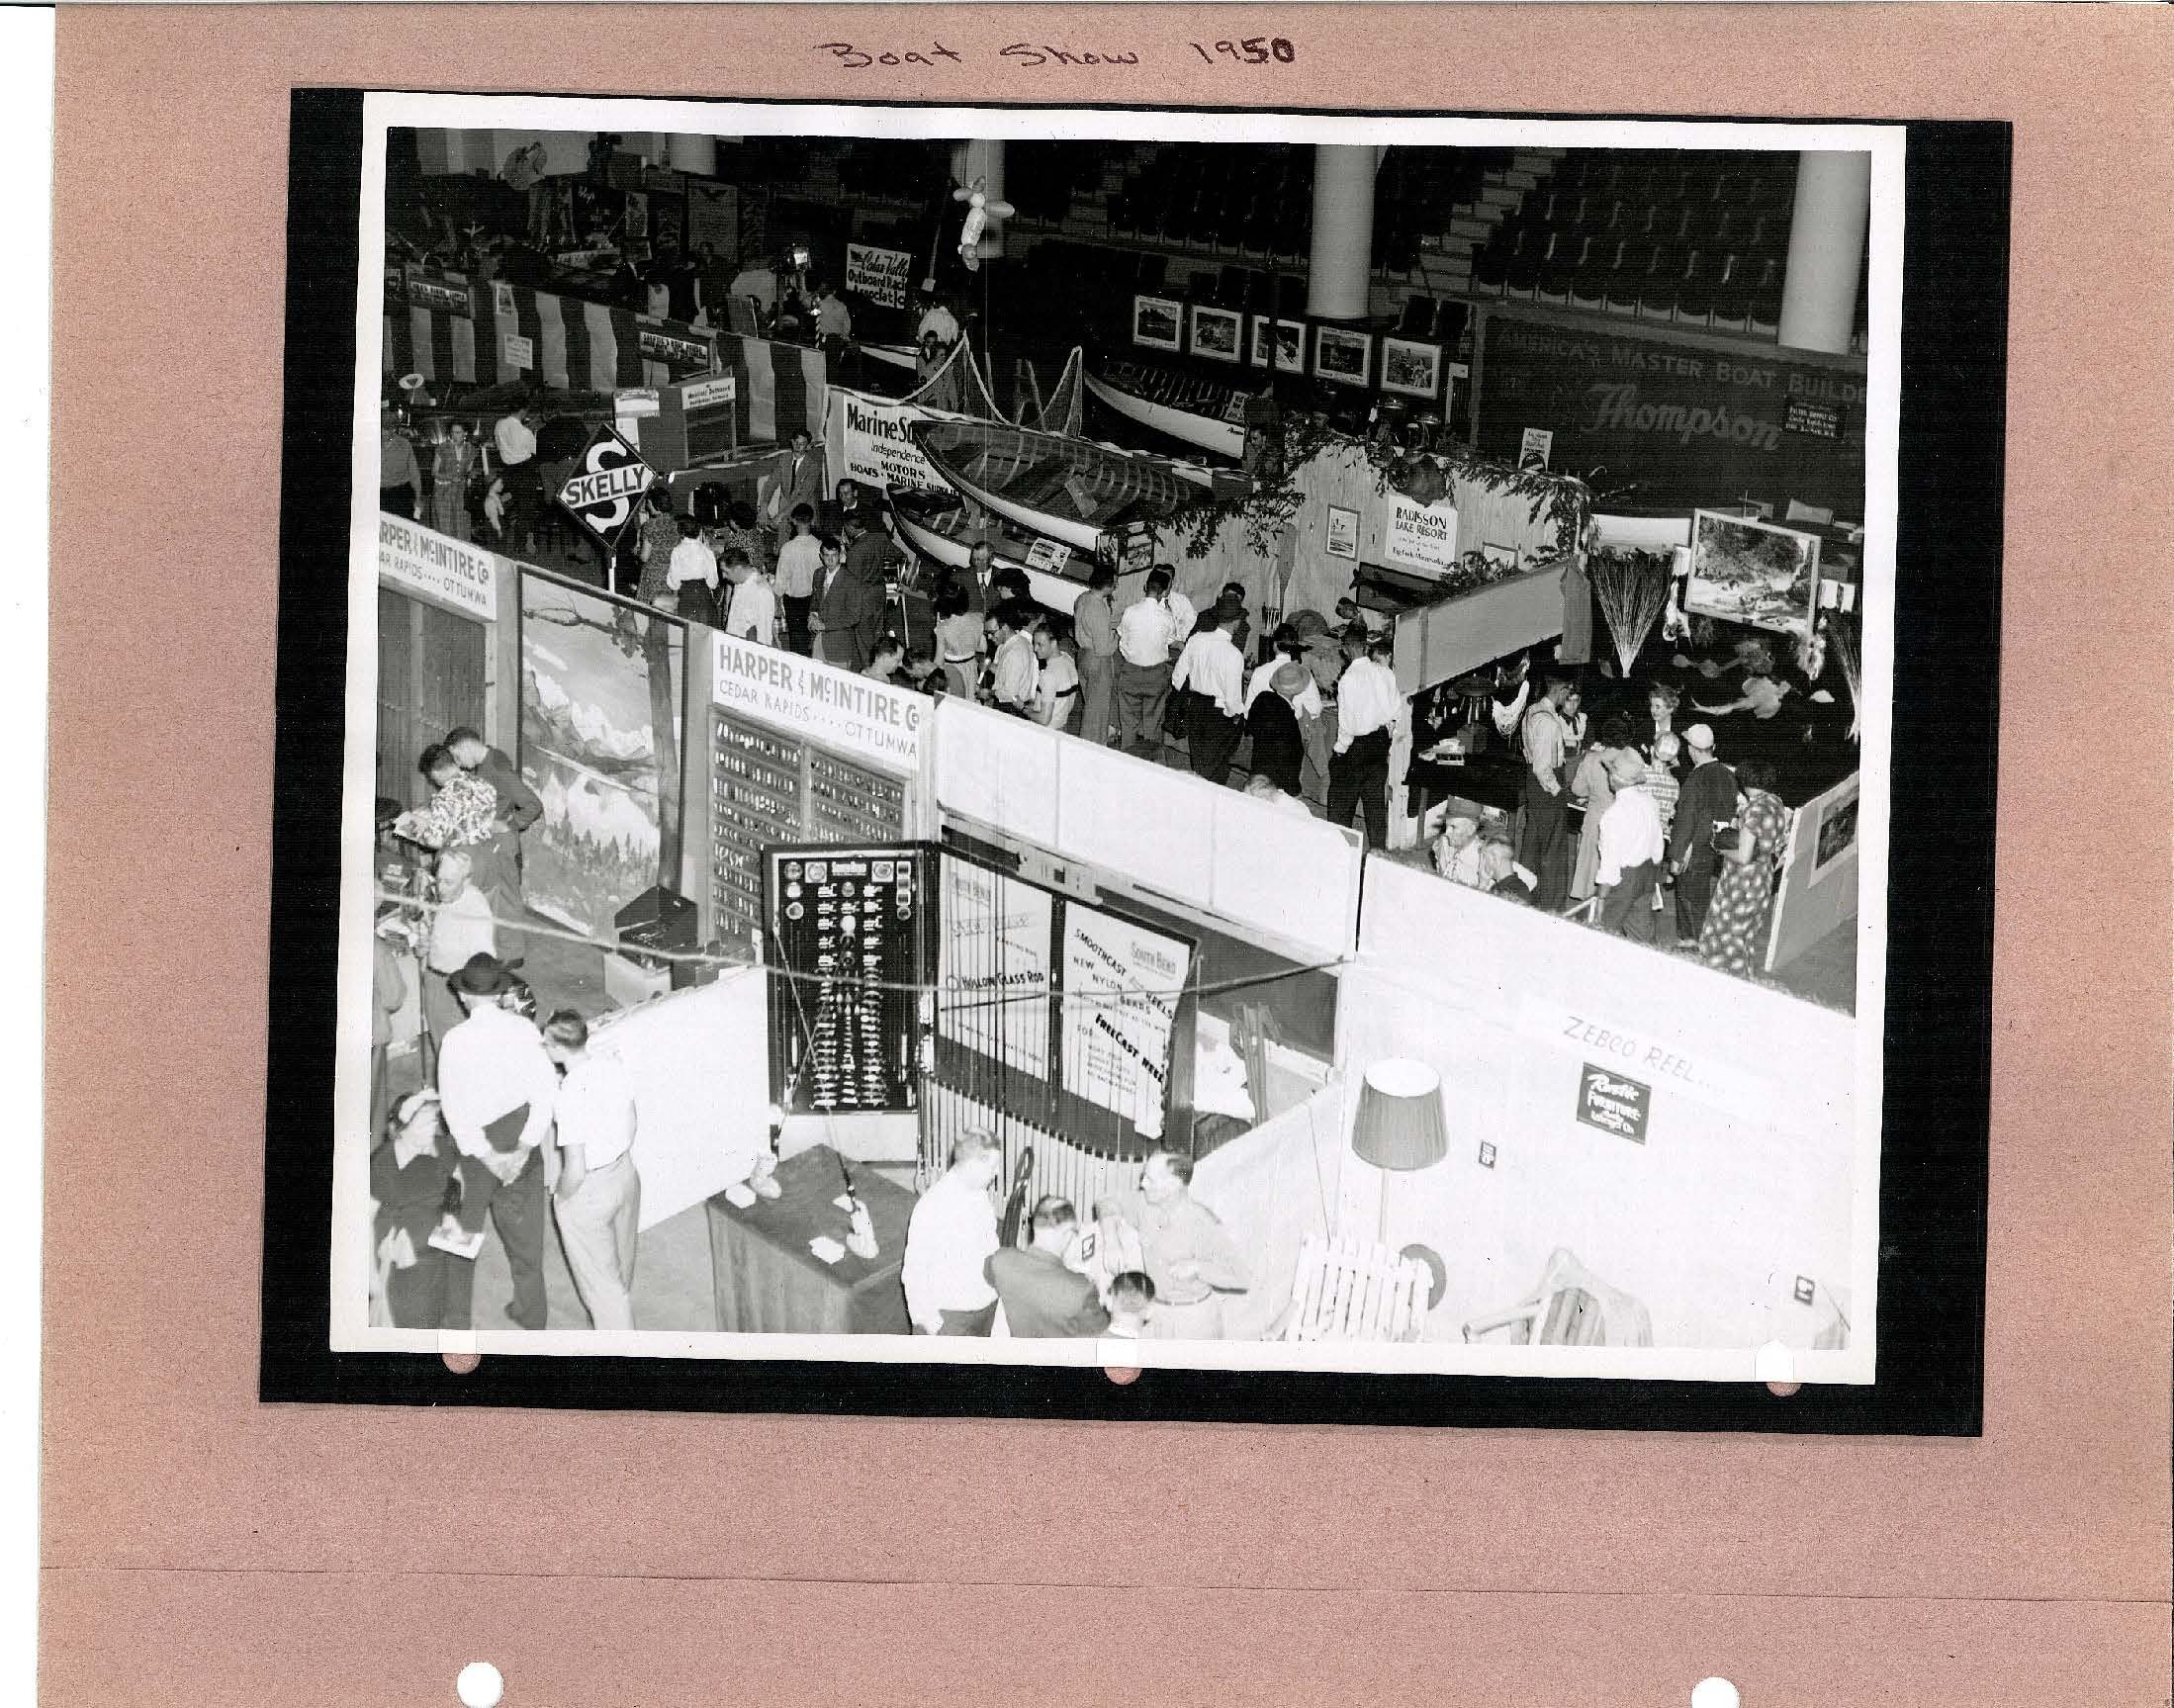 Photo taken at Boat show 1950 of people at show